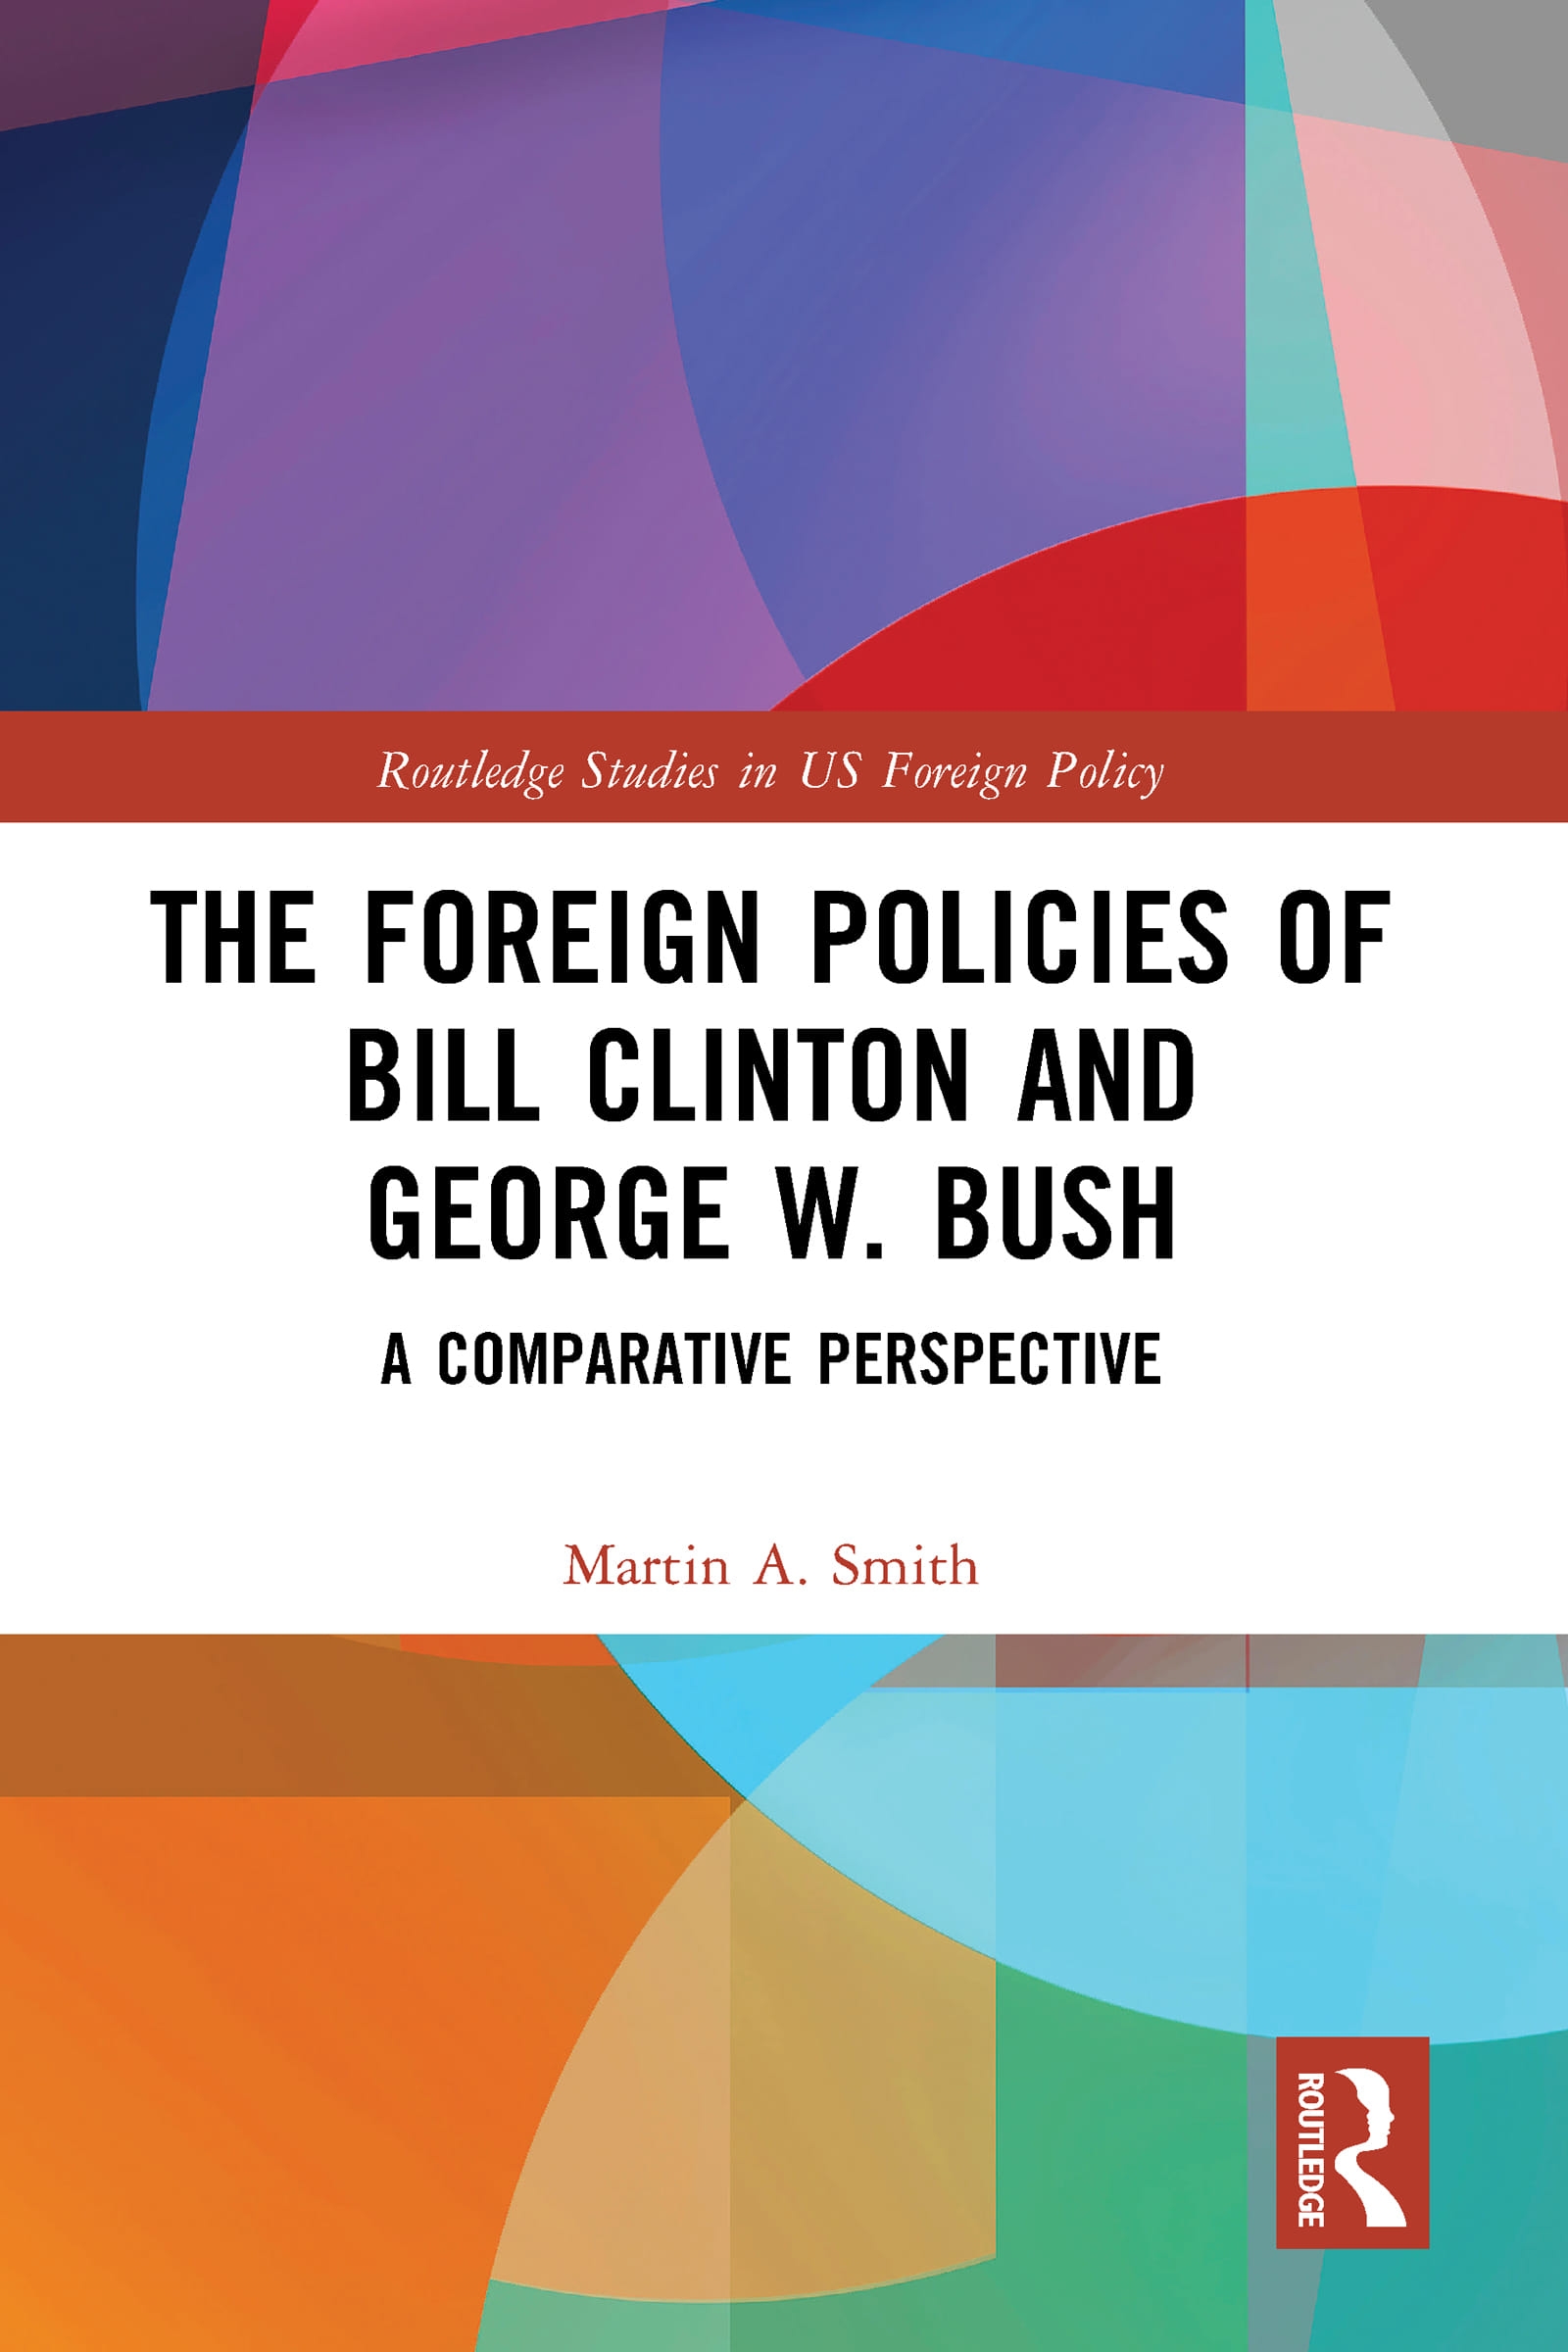 The Foreign Policies of Bill Clinton and George W. Bush: A Comparative Perspective